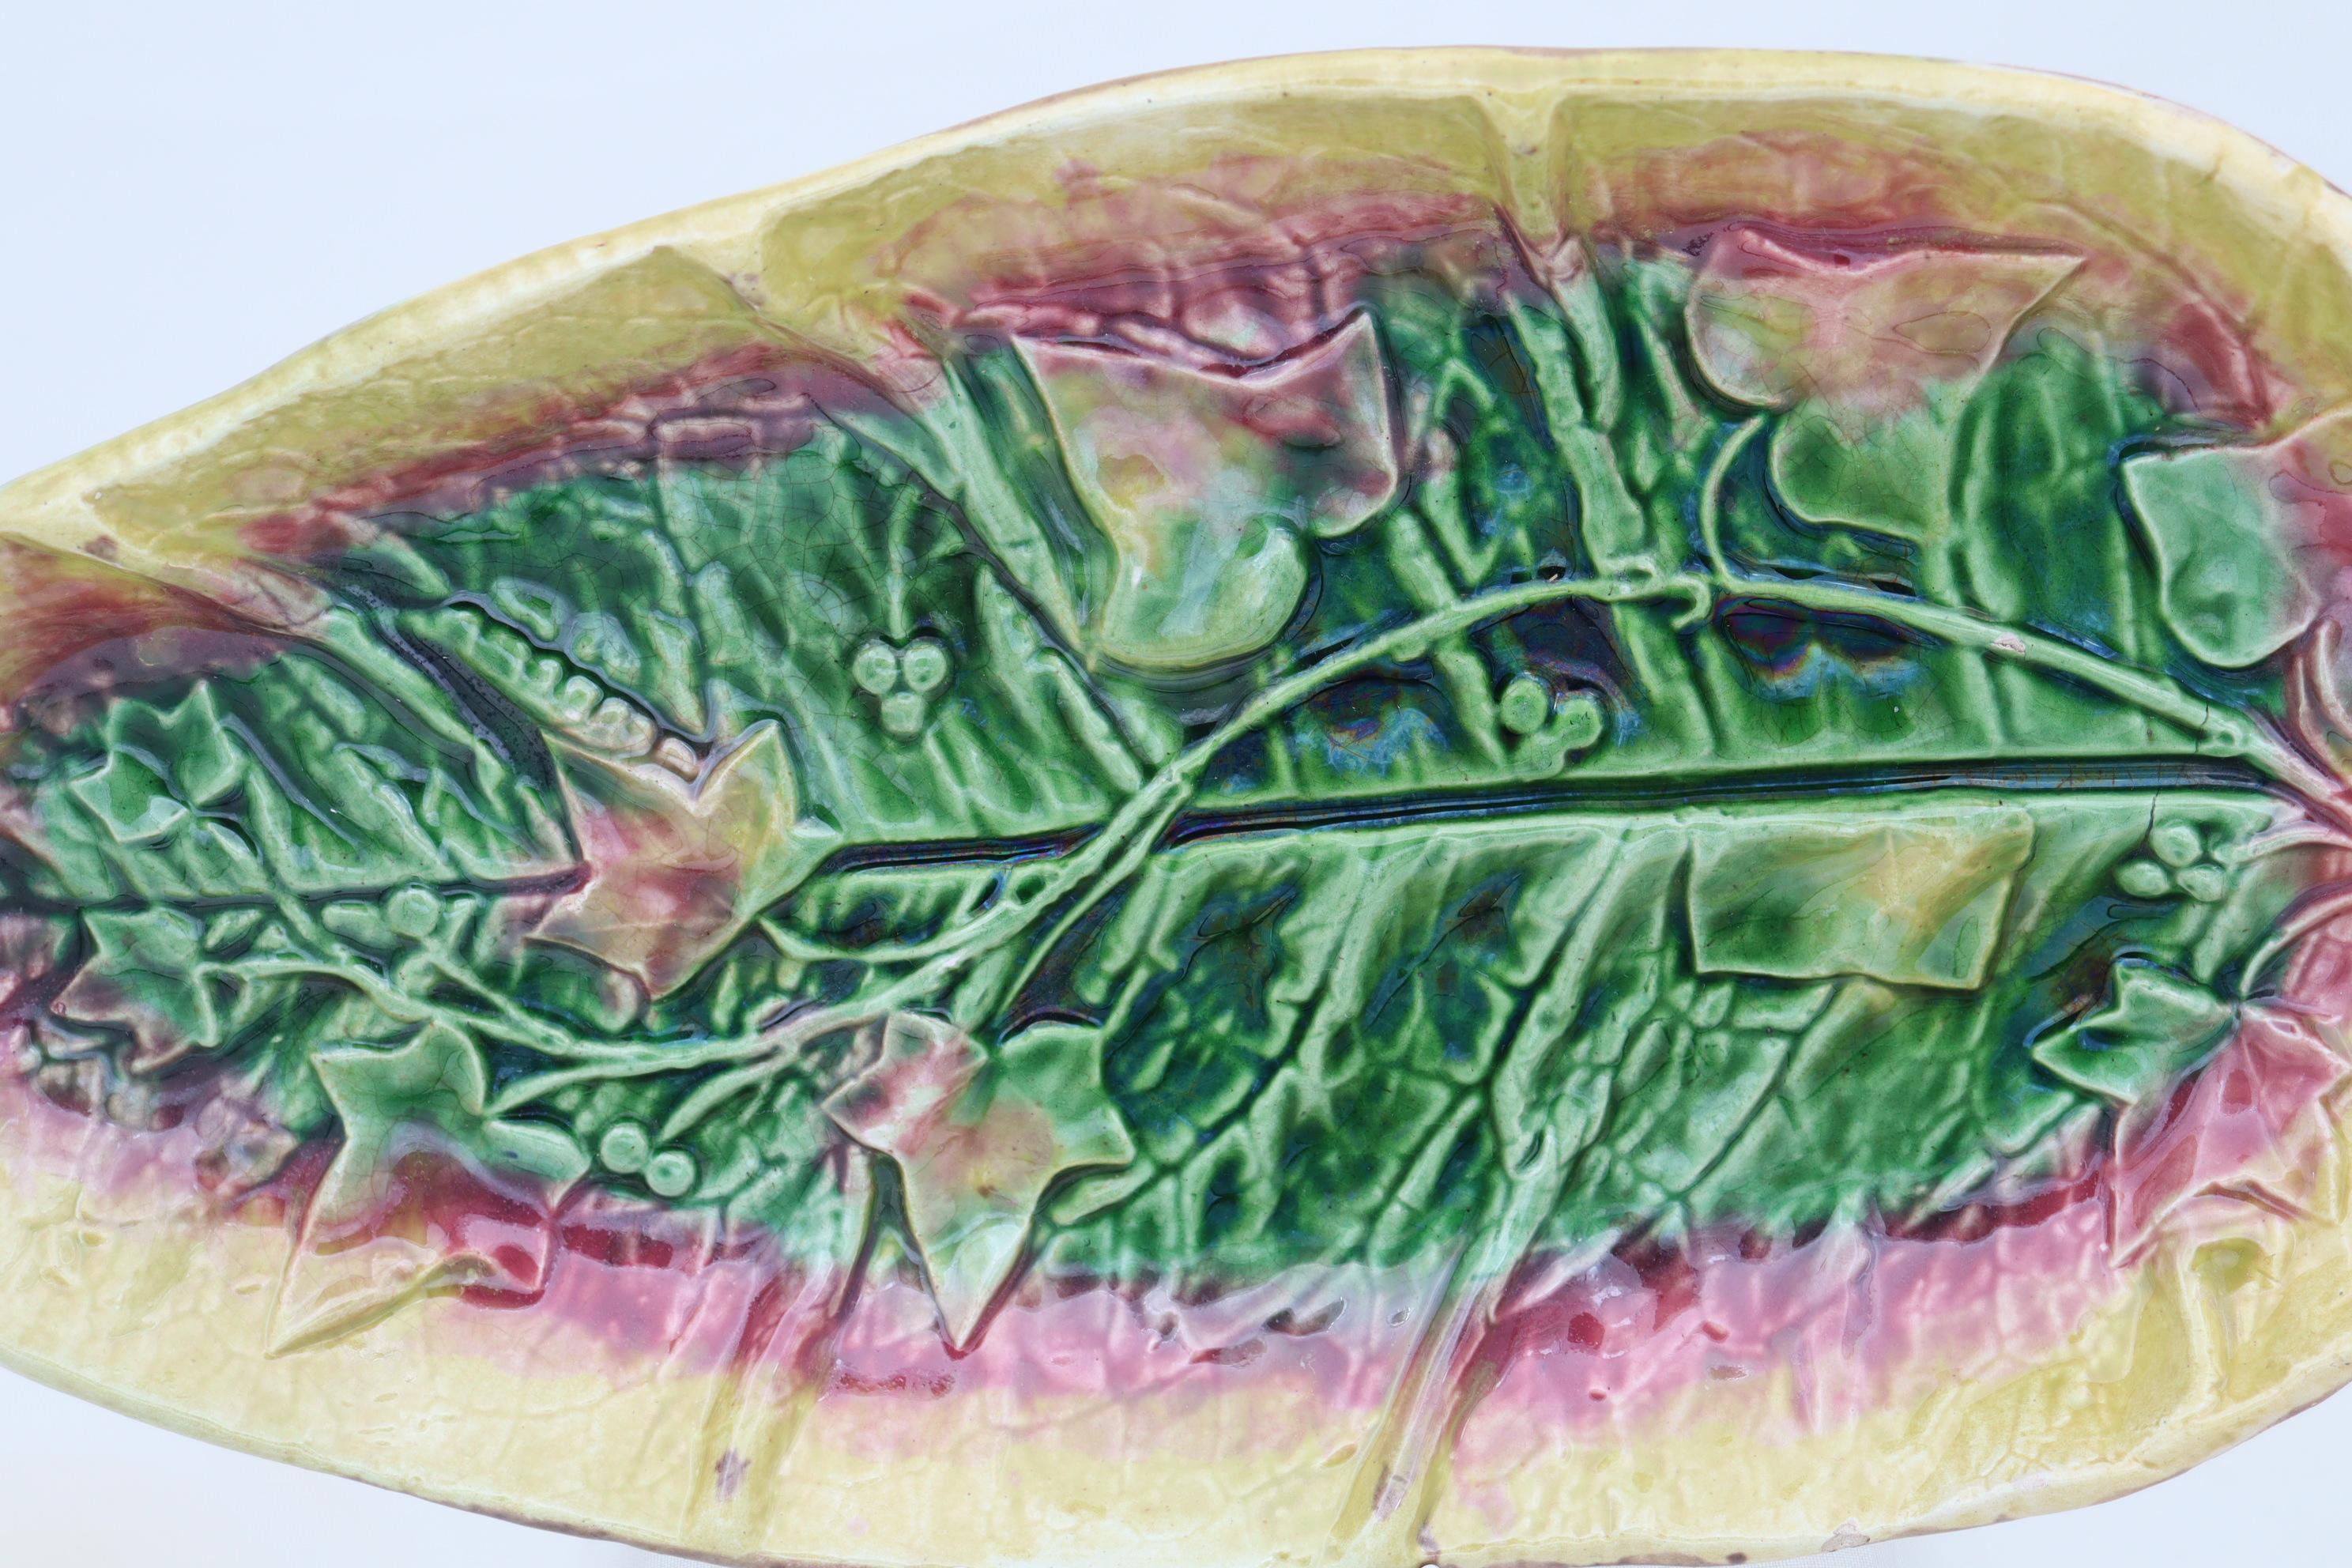 This majolica serving tray by Thomas Forester is modelled as a large leaf overlaid with a strand of ivy leaves and seeds which runs down its length, and coloured with green, magenta and yellow glazes. It measures 340 mm (13.25 inches) in length, 190